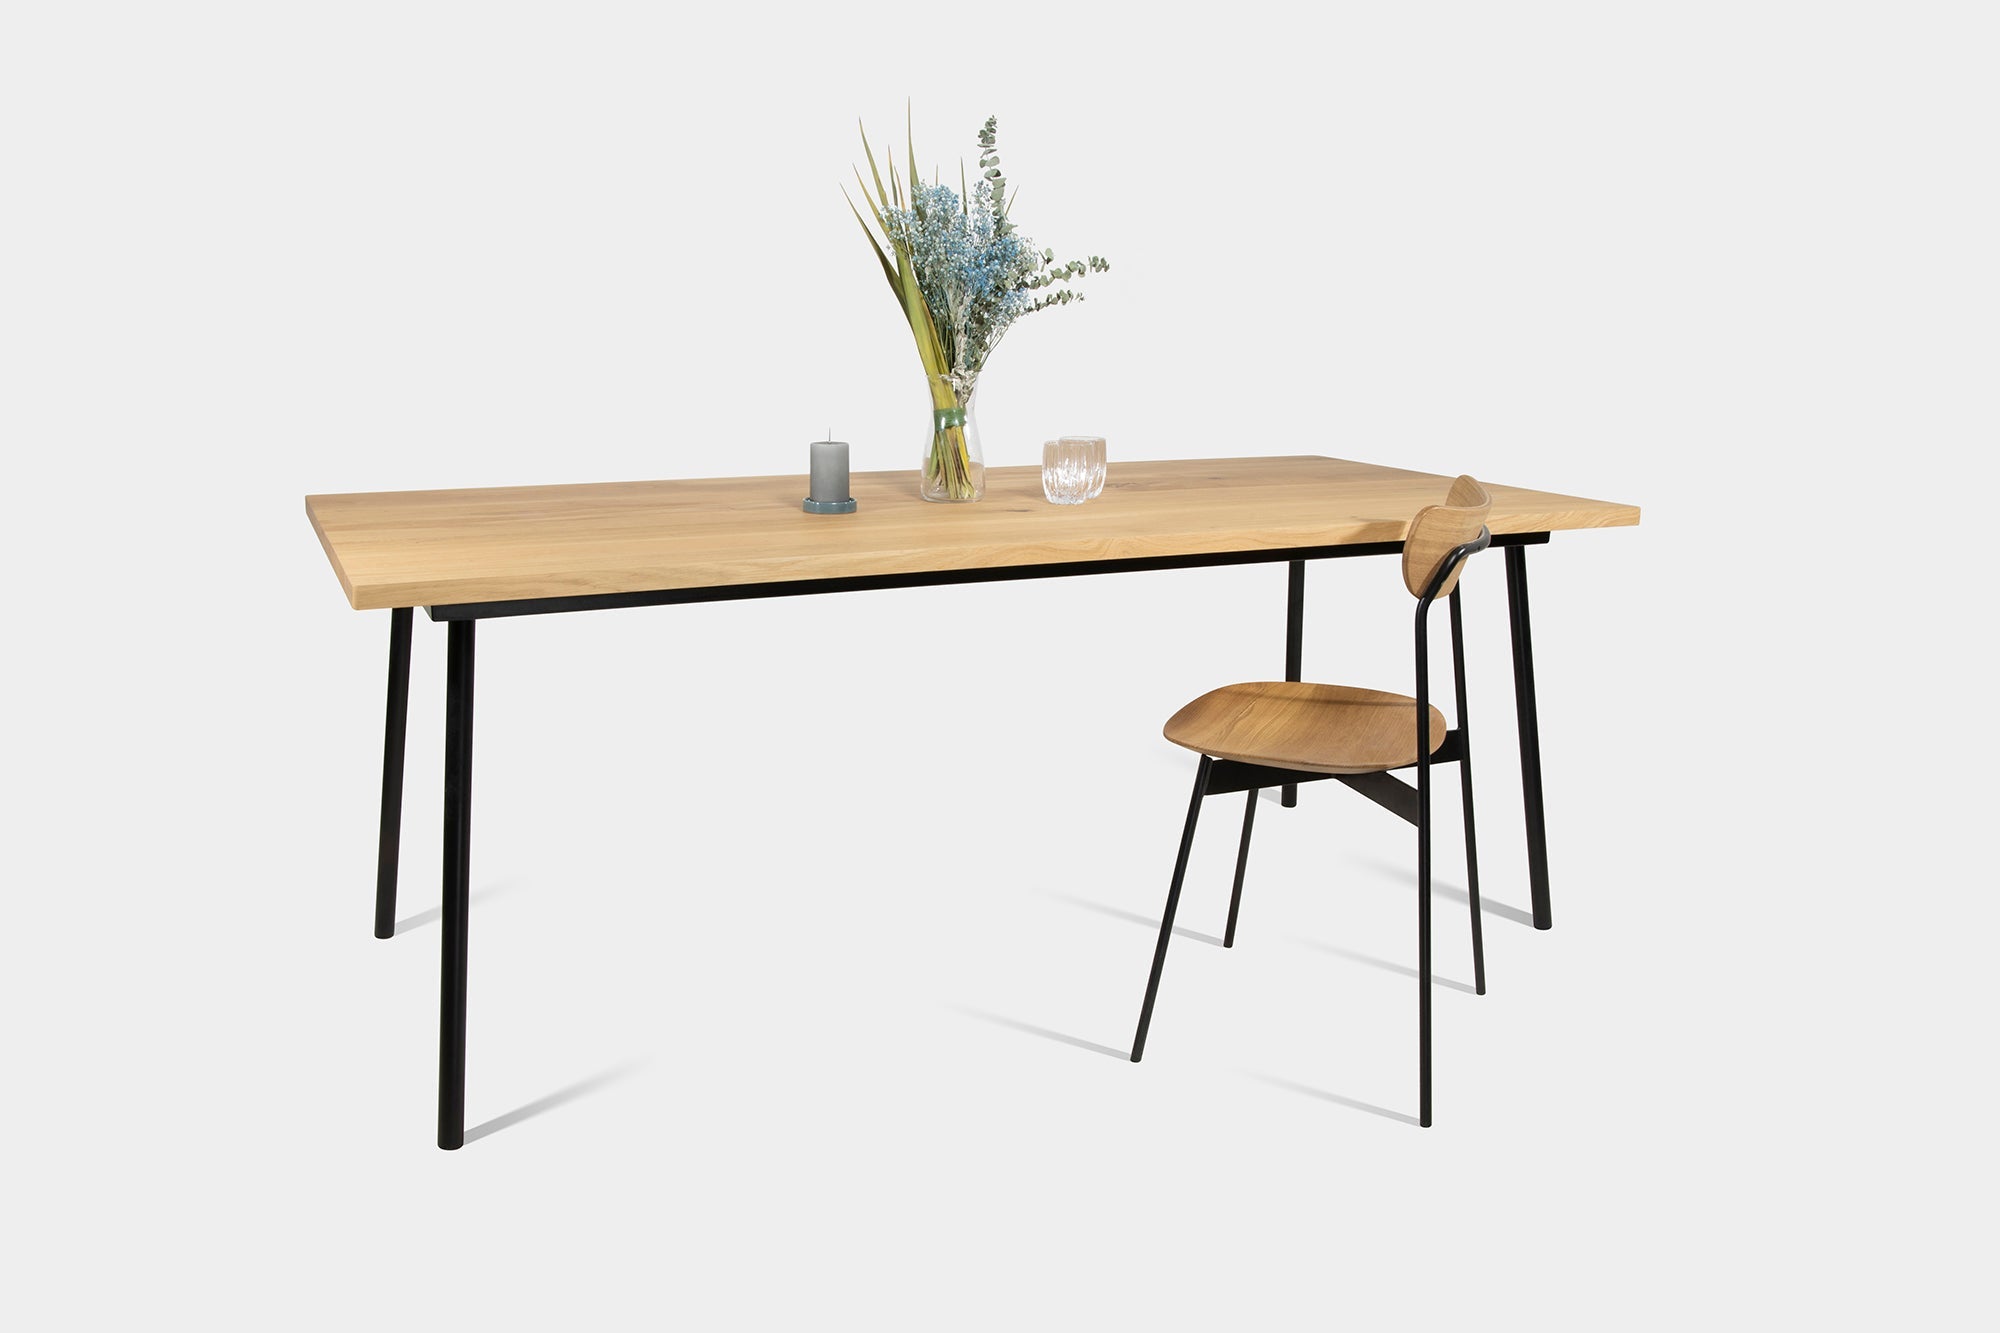 Mid Century Modern Oak Dining Table And Extendable Dining Table on Industrial Metal Legs | MIRA Dining Table-Hardman Design